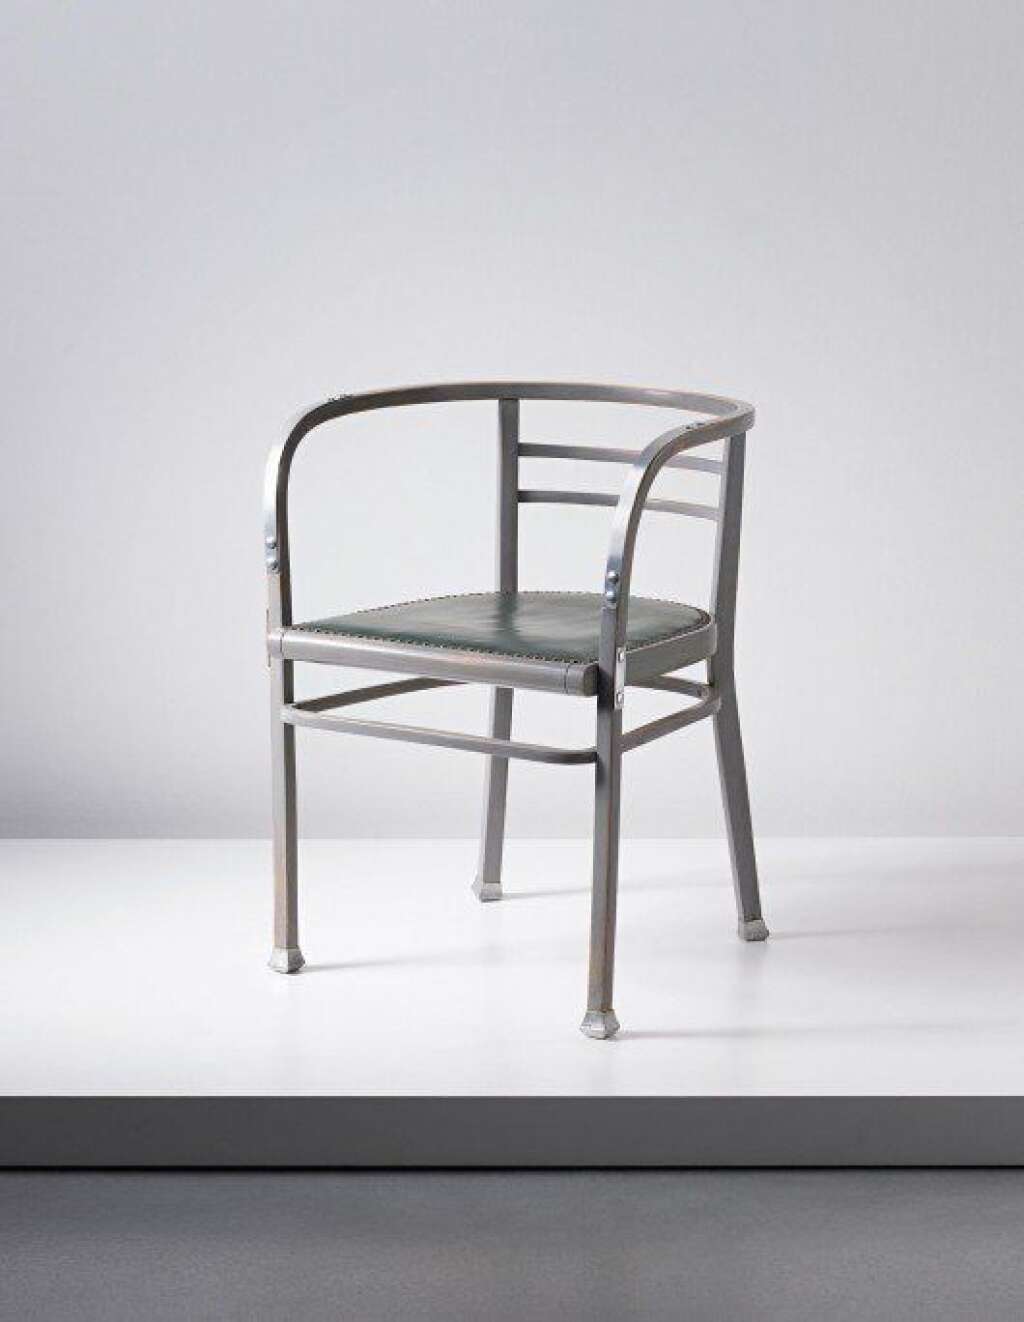 Otto Wagner : "Armchair" -